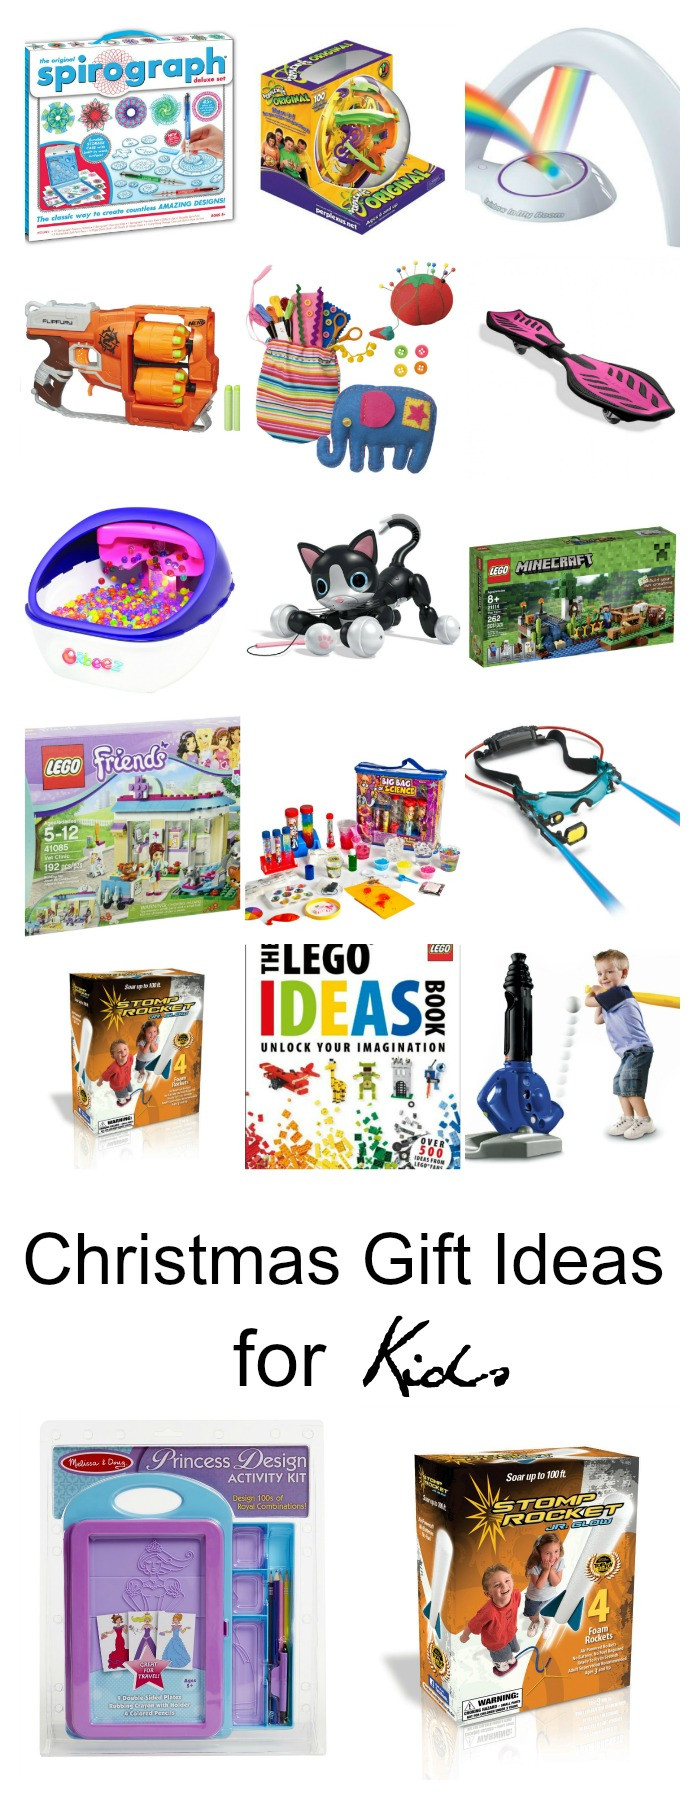 Holiday Gift Ideas For Kids
 Christmas Gift Ideas for Kids The Idea Room